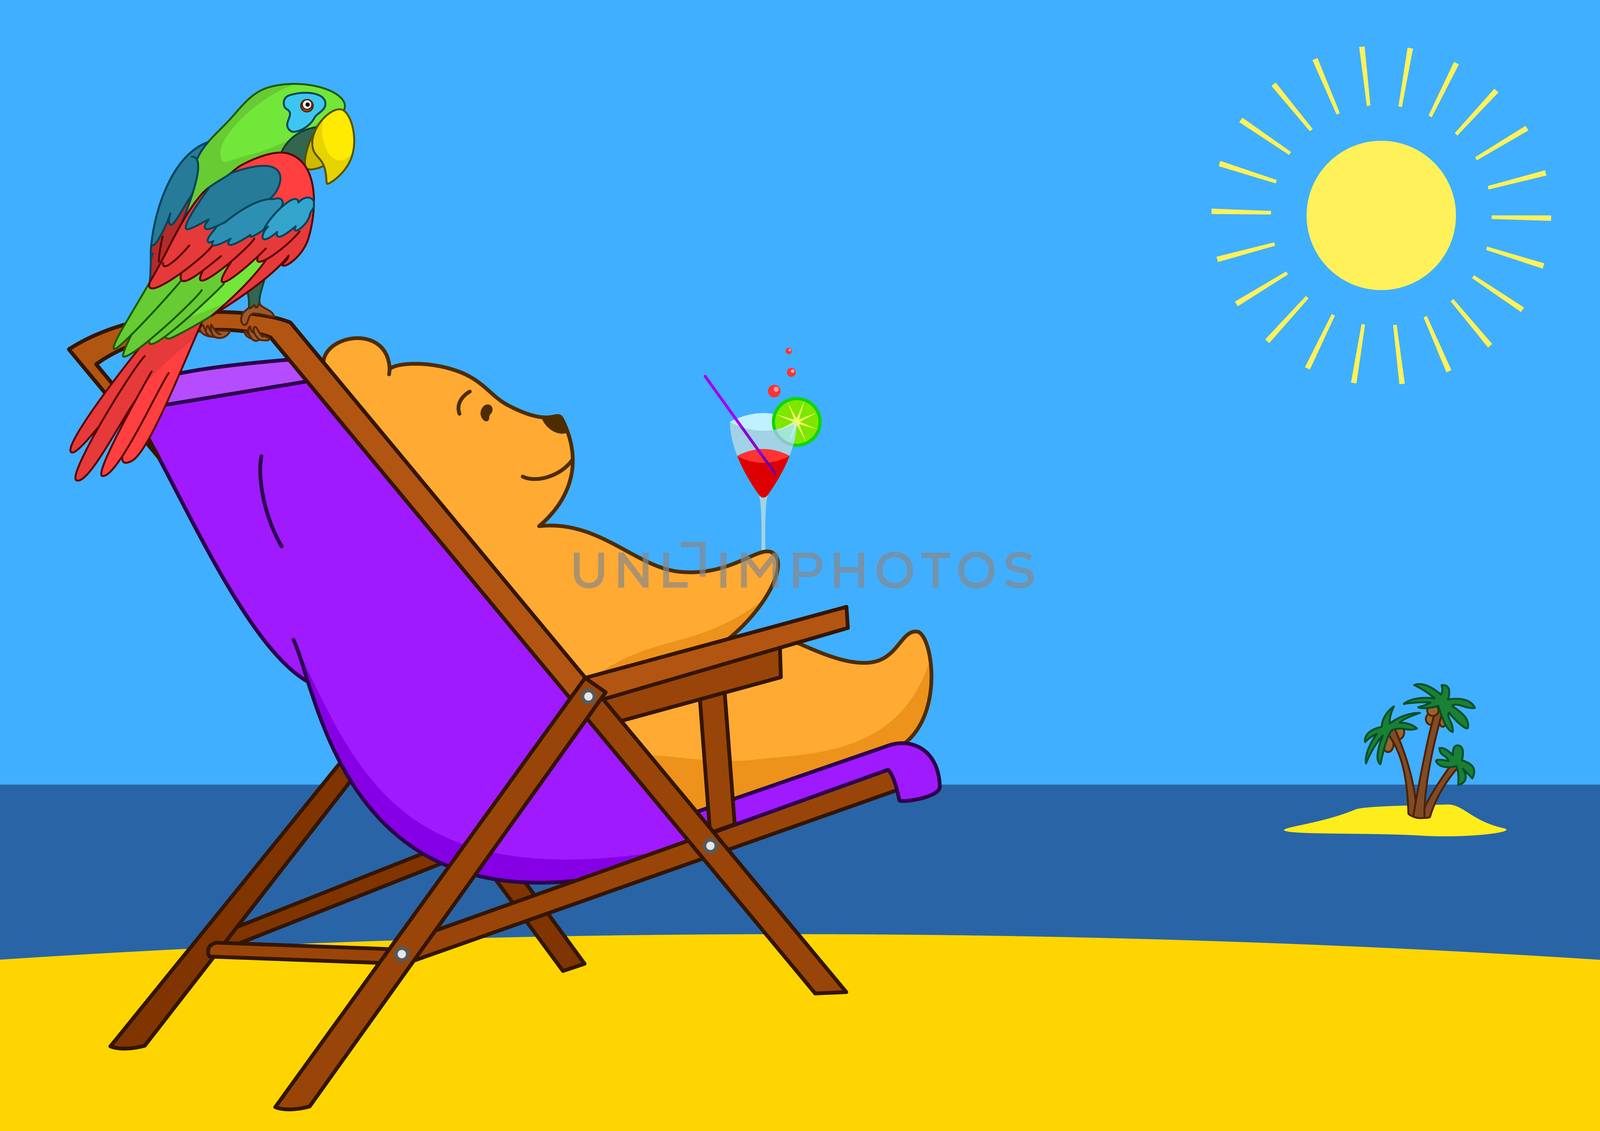 Teddy bear sitting in a chaise lounge on a beach and drinks a cocktail, its friend a parrot there and then sits